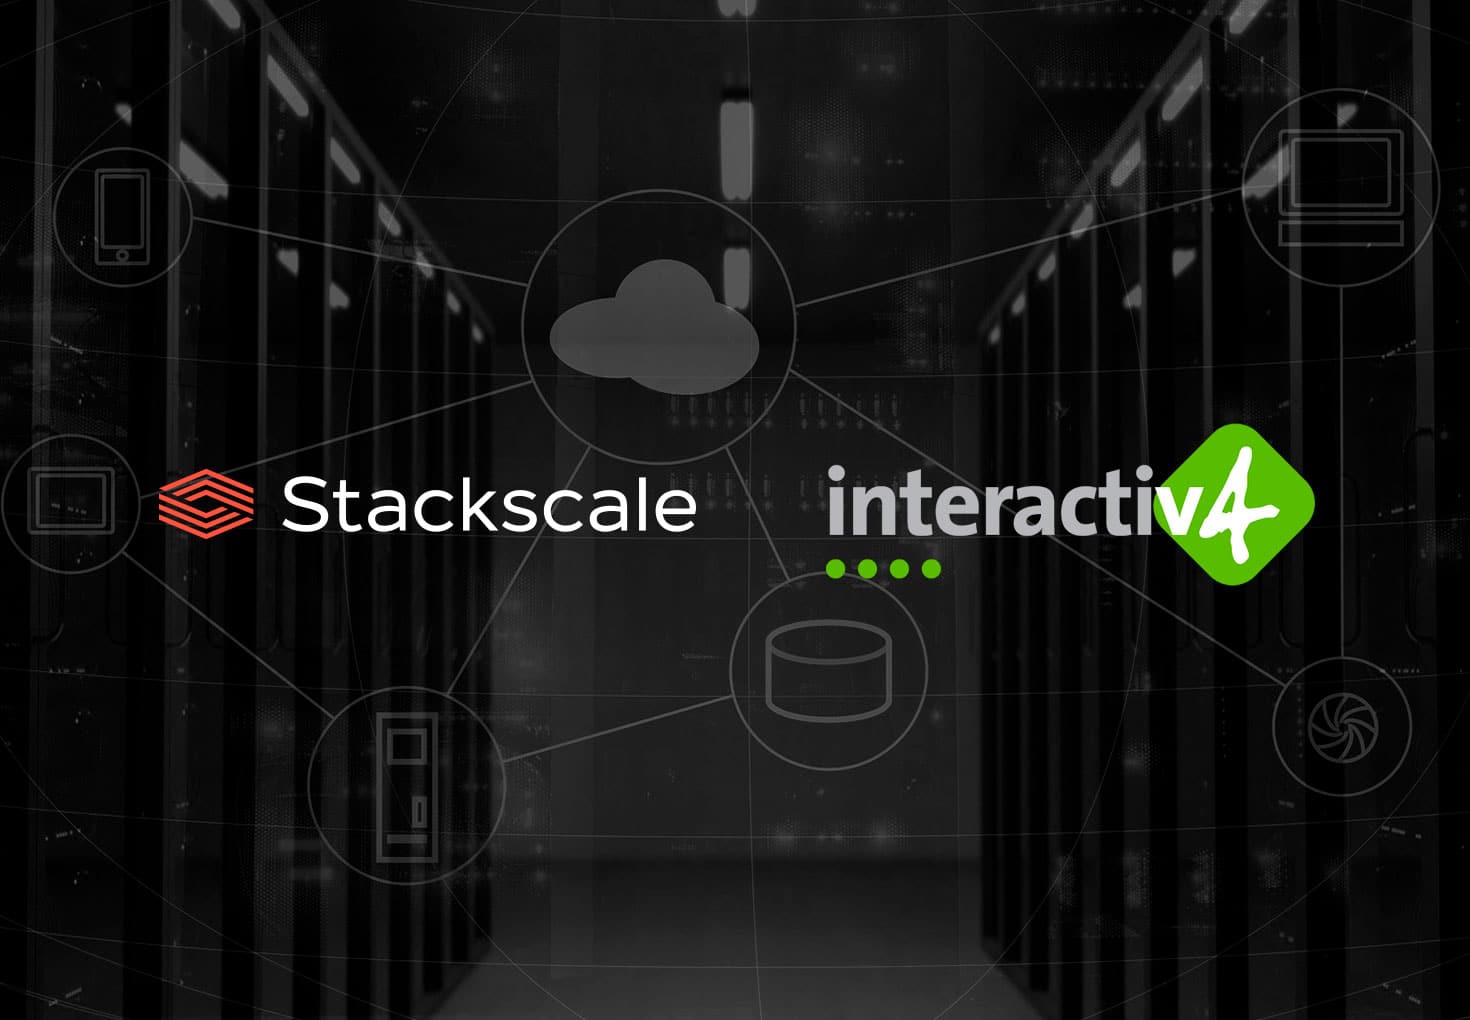 Stackscale and Interactiv4 partnership agreement 2013